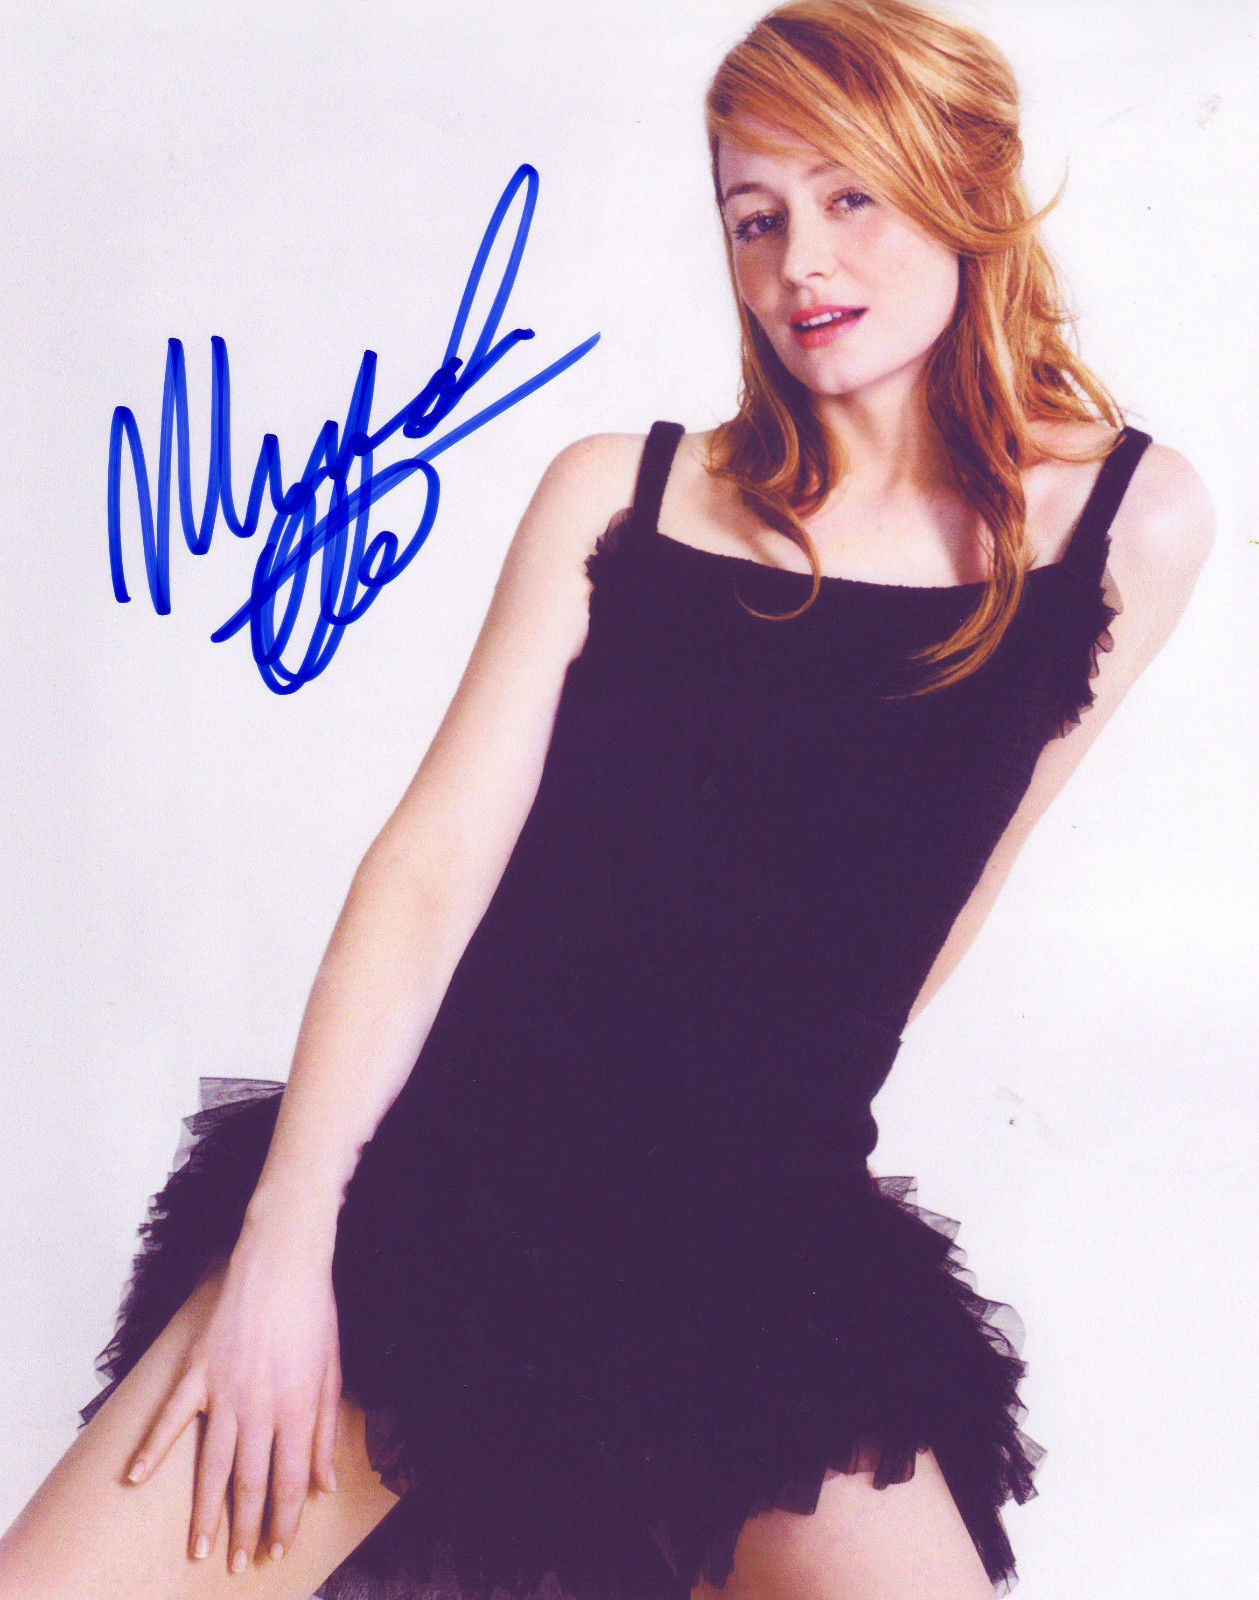 MIRANDA OTTO AUTOGRAPH SIGNED PP Photo Poster painting POSTER